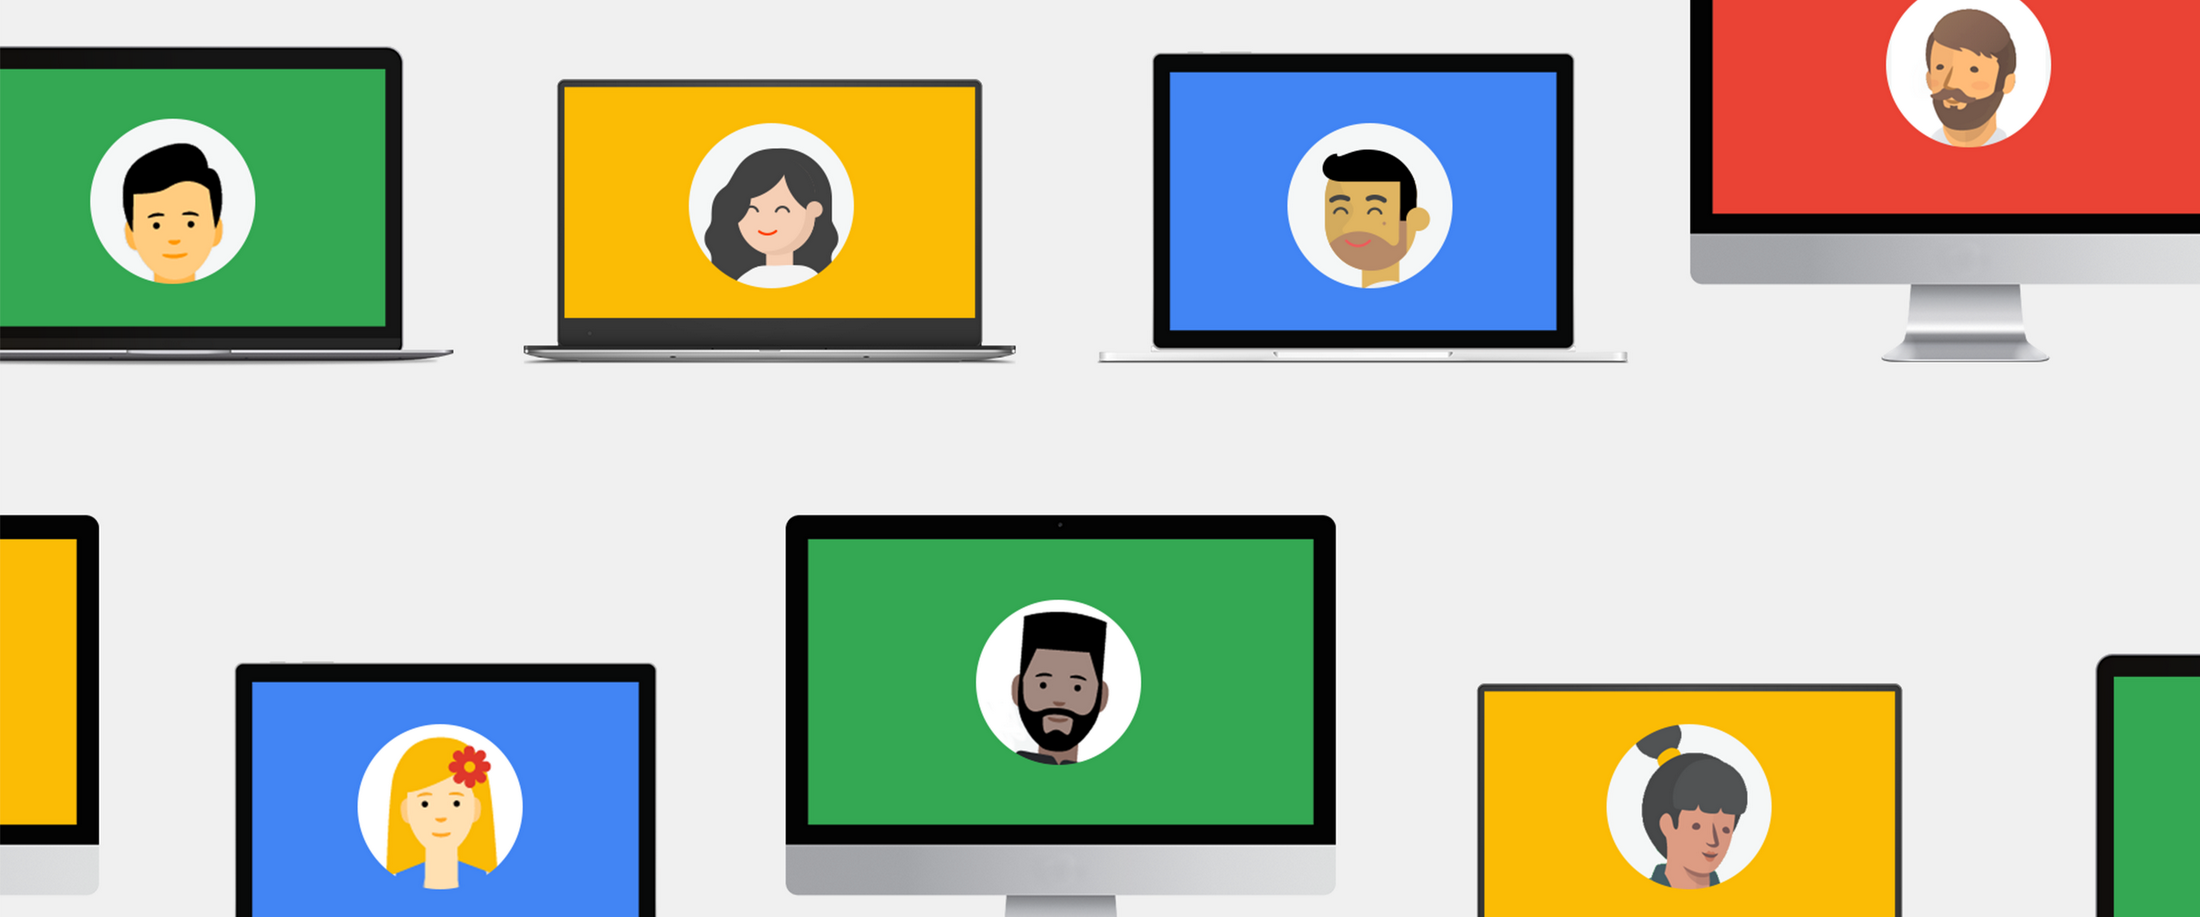 G Suite Essentials: The simplest way for teams to securely work together